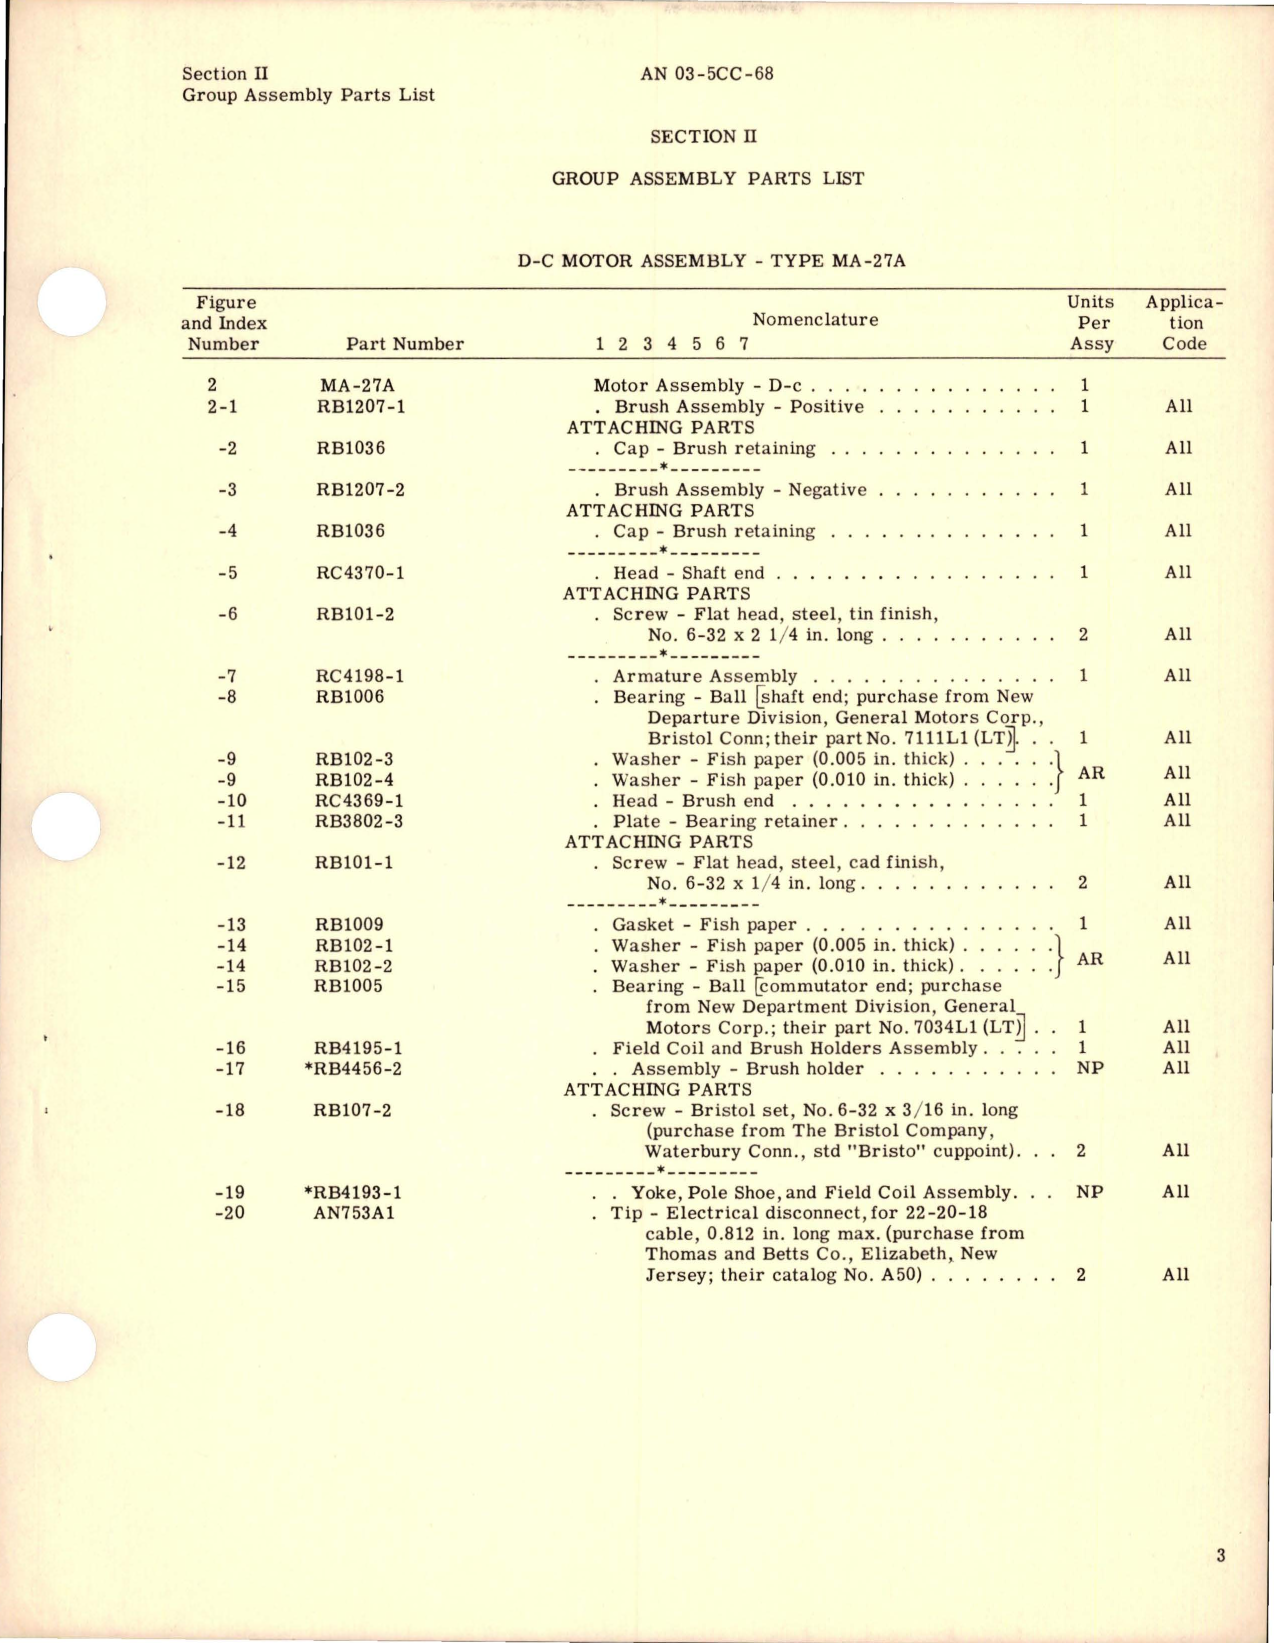 Sample page 5 from AirCorps Library document: Parts Catalog for DC Motor - Model MA-27A